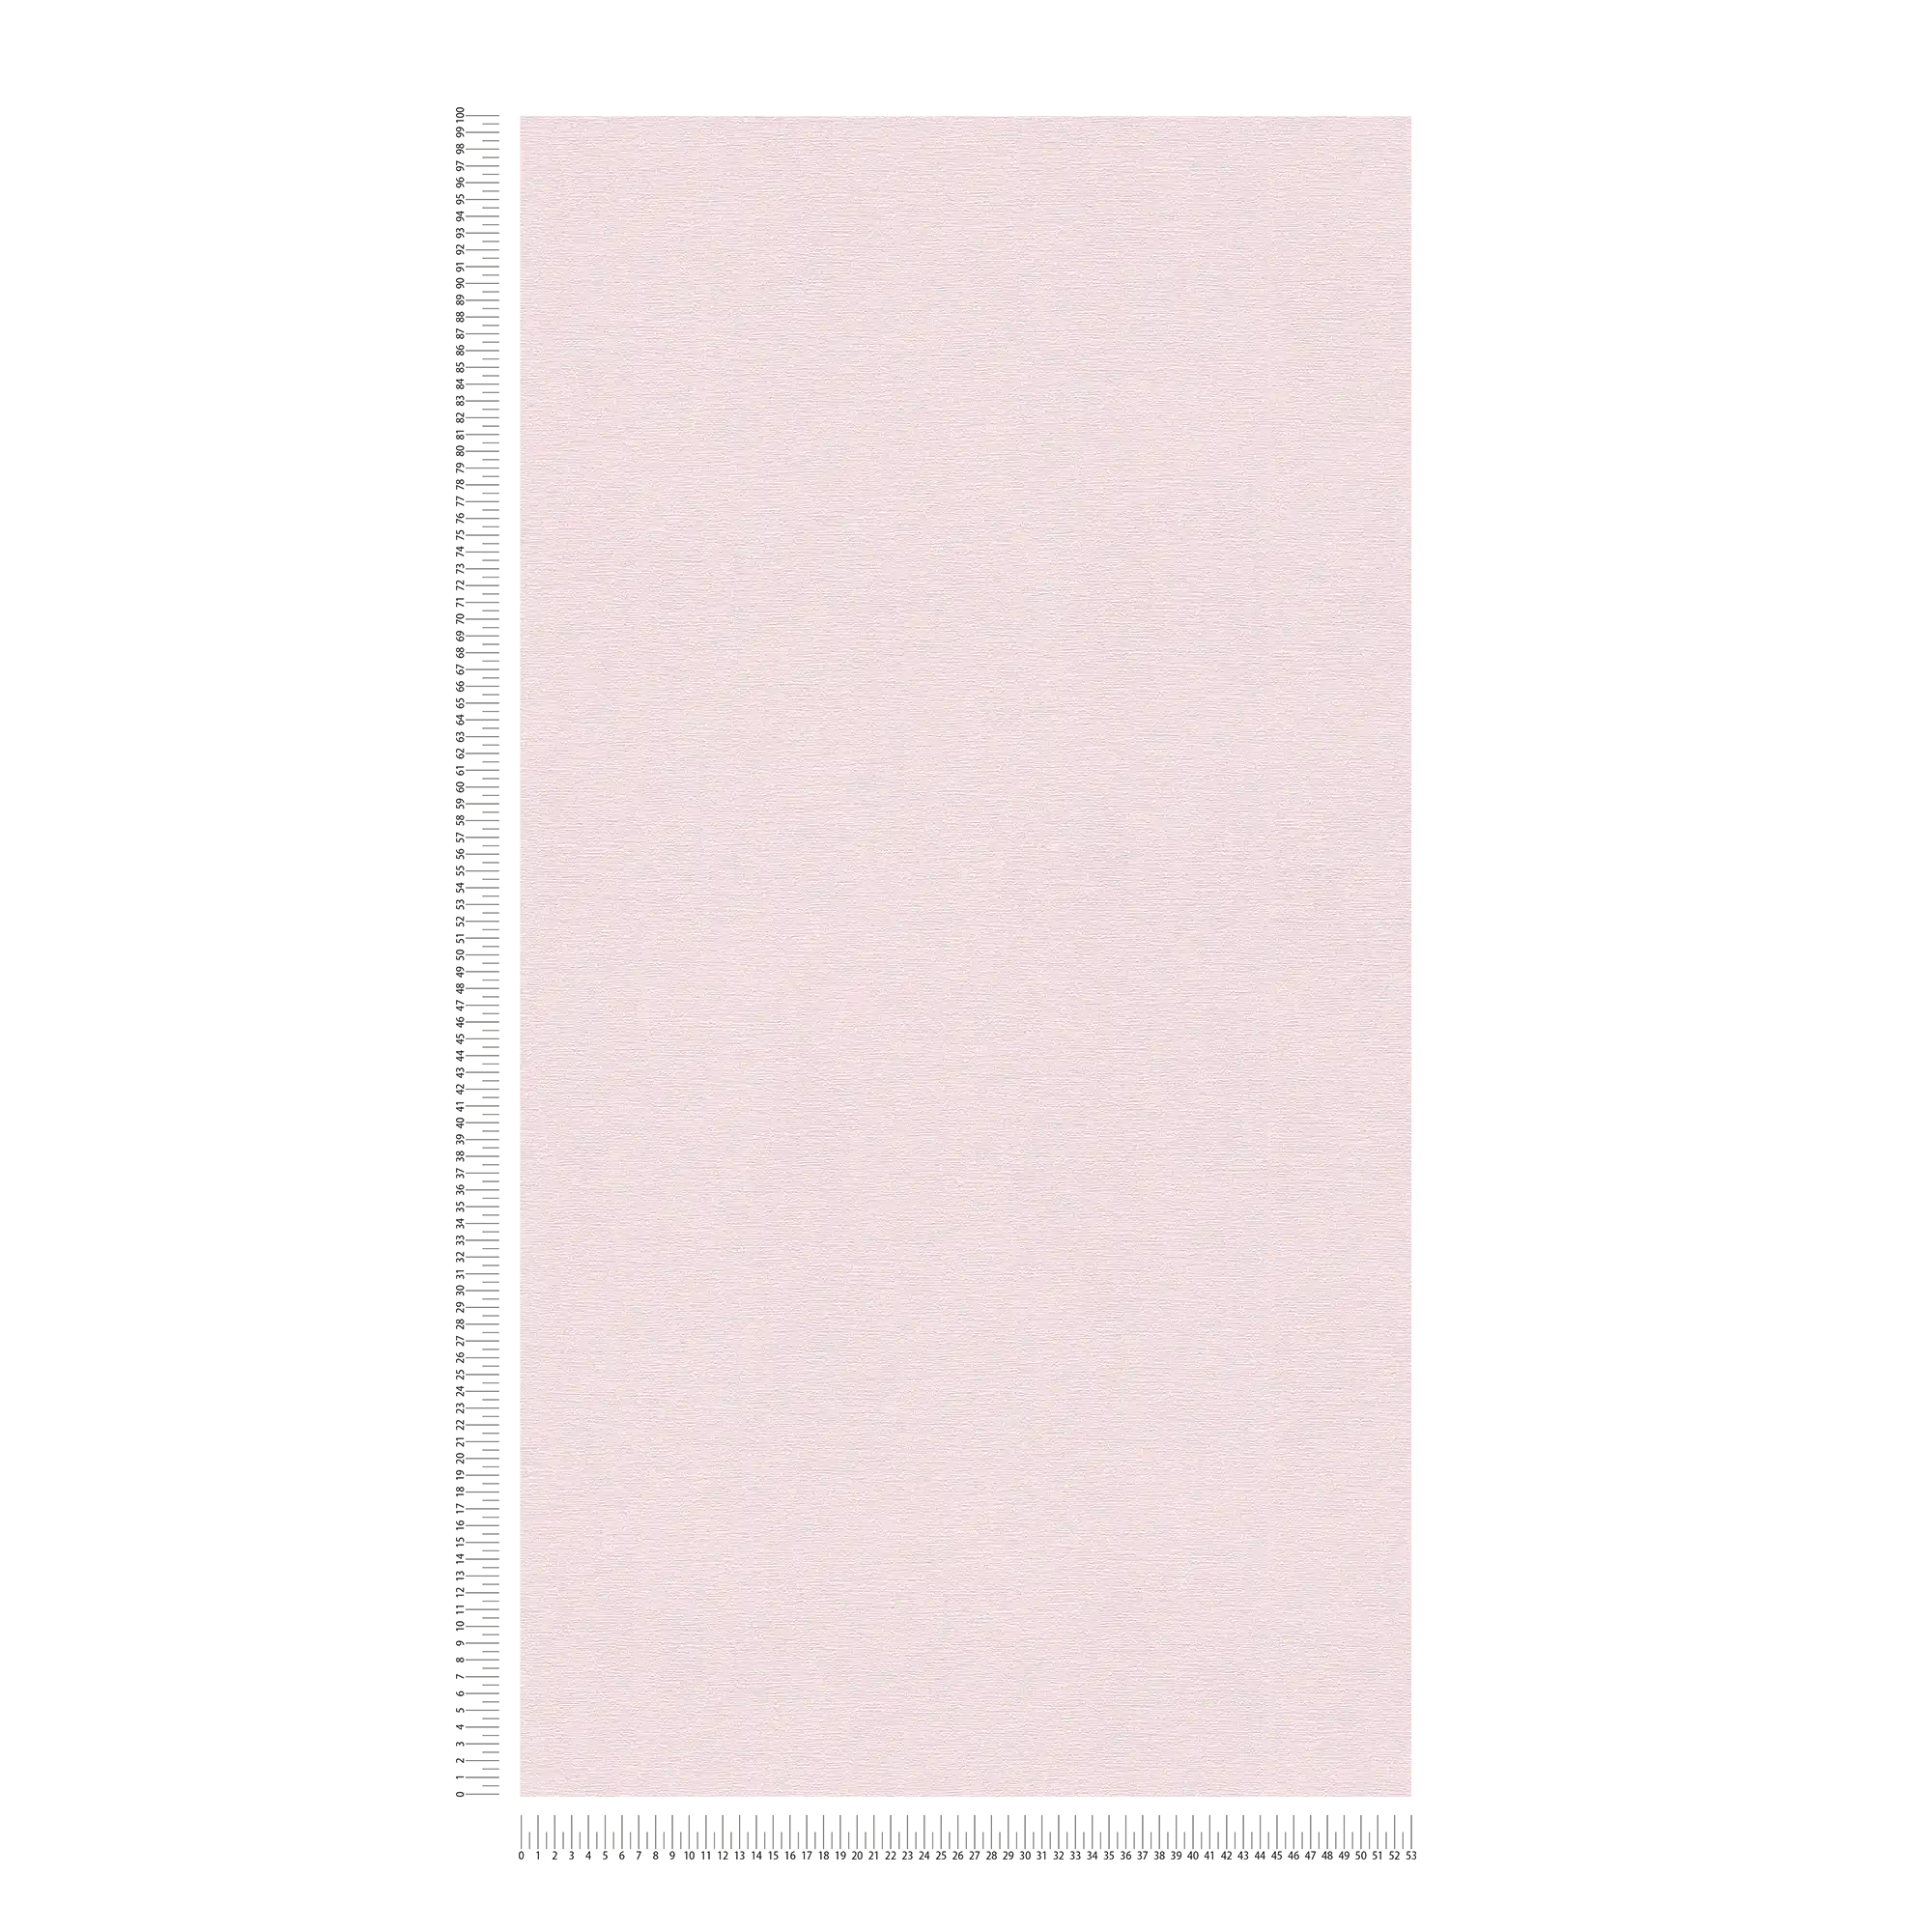             Non-woven wallpaper plain with textile look - pink
        